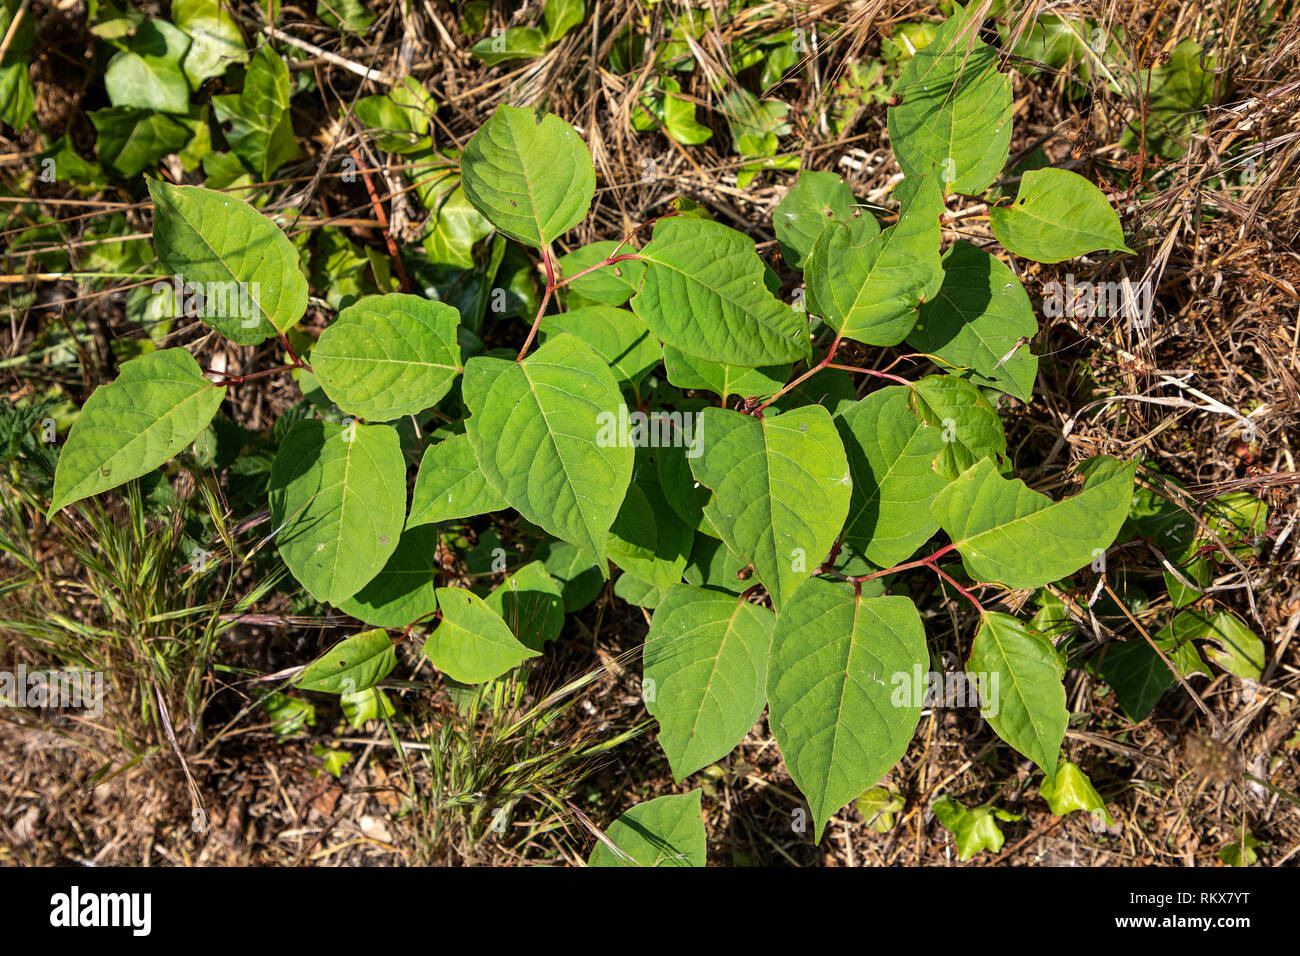 Japanese Knotweed, Fallopia japonica growing near Fort Tourgis on Alderney, Channel Islands. Stock Photo